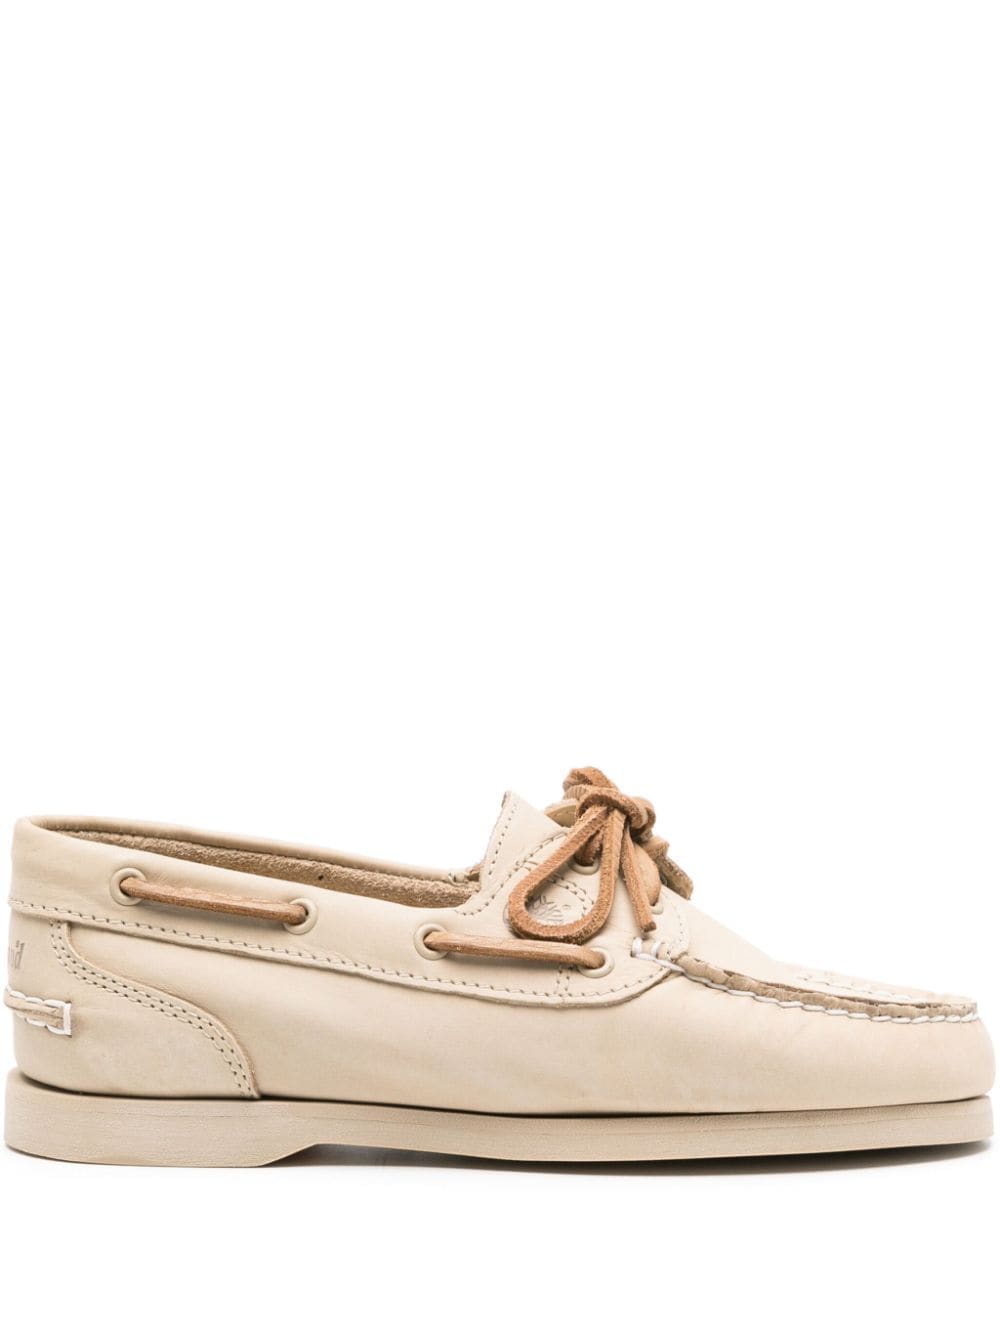 Timberland bow-detail leather boat shoes - Neutrals von Timberland